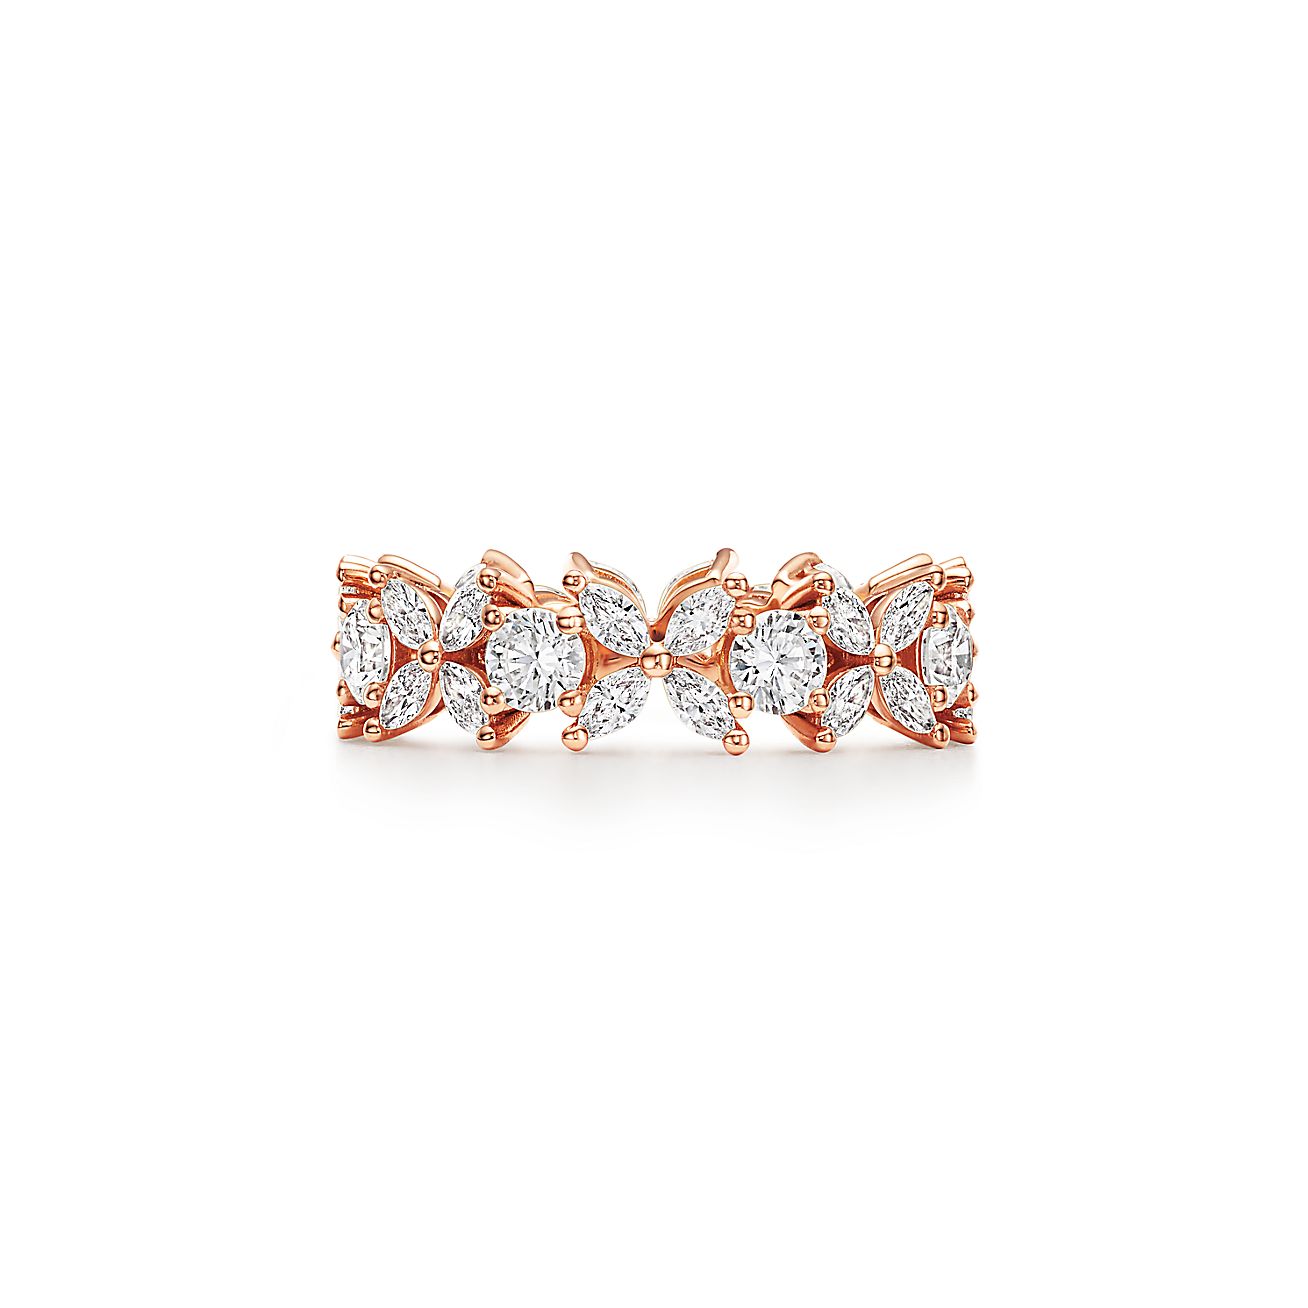 Tiffany Victoria™ Tennis Bracelet in Rose Gold with Diamonds